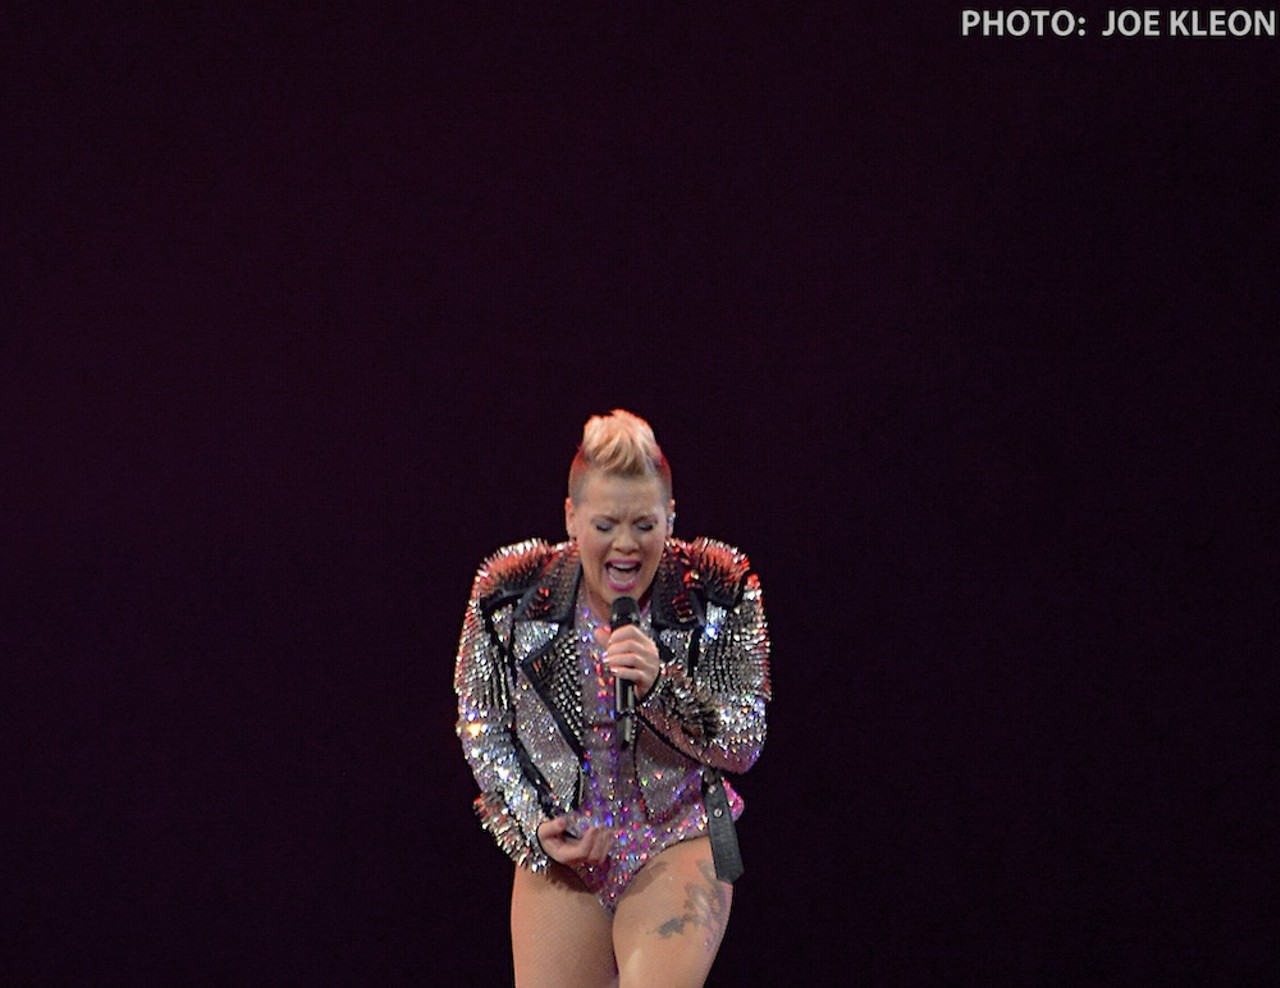 Concert Photos: Pink's Stunt-Filled Performance at the Rocket Mortgage FieldHouse